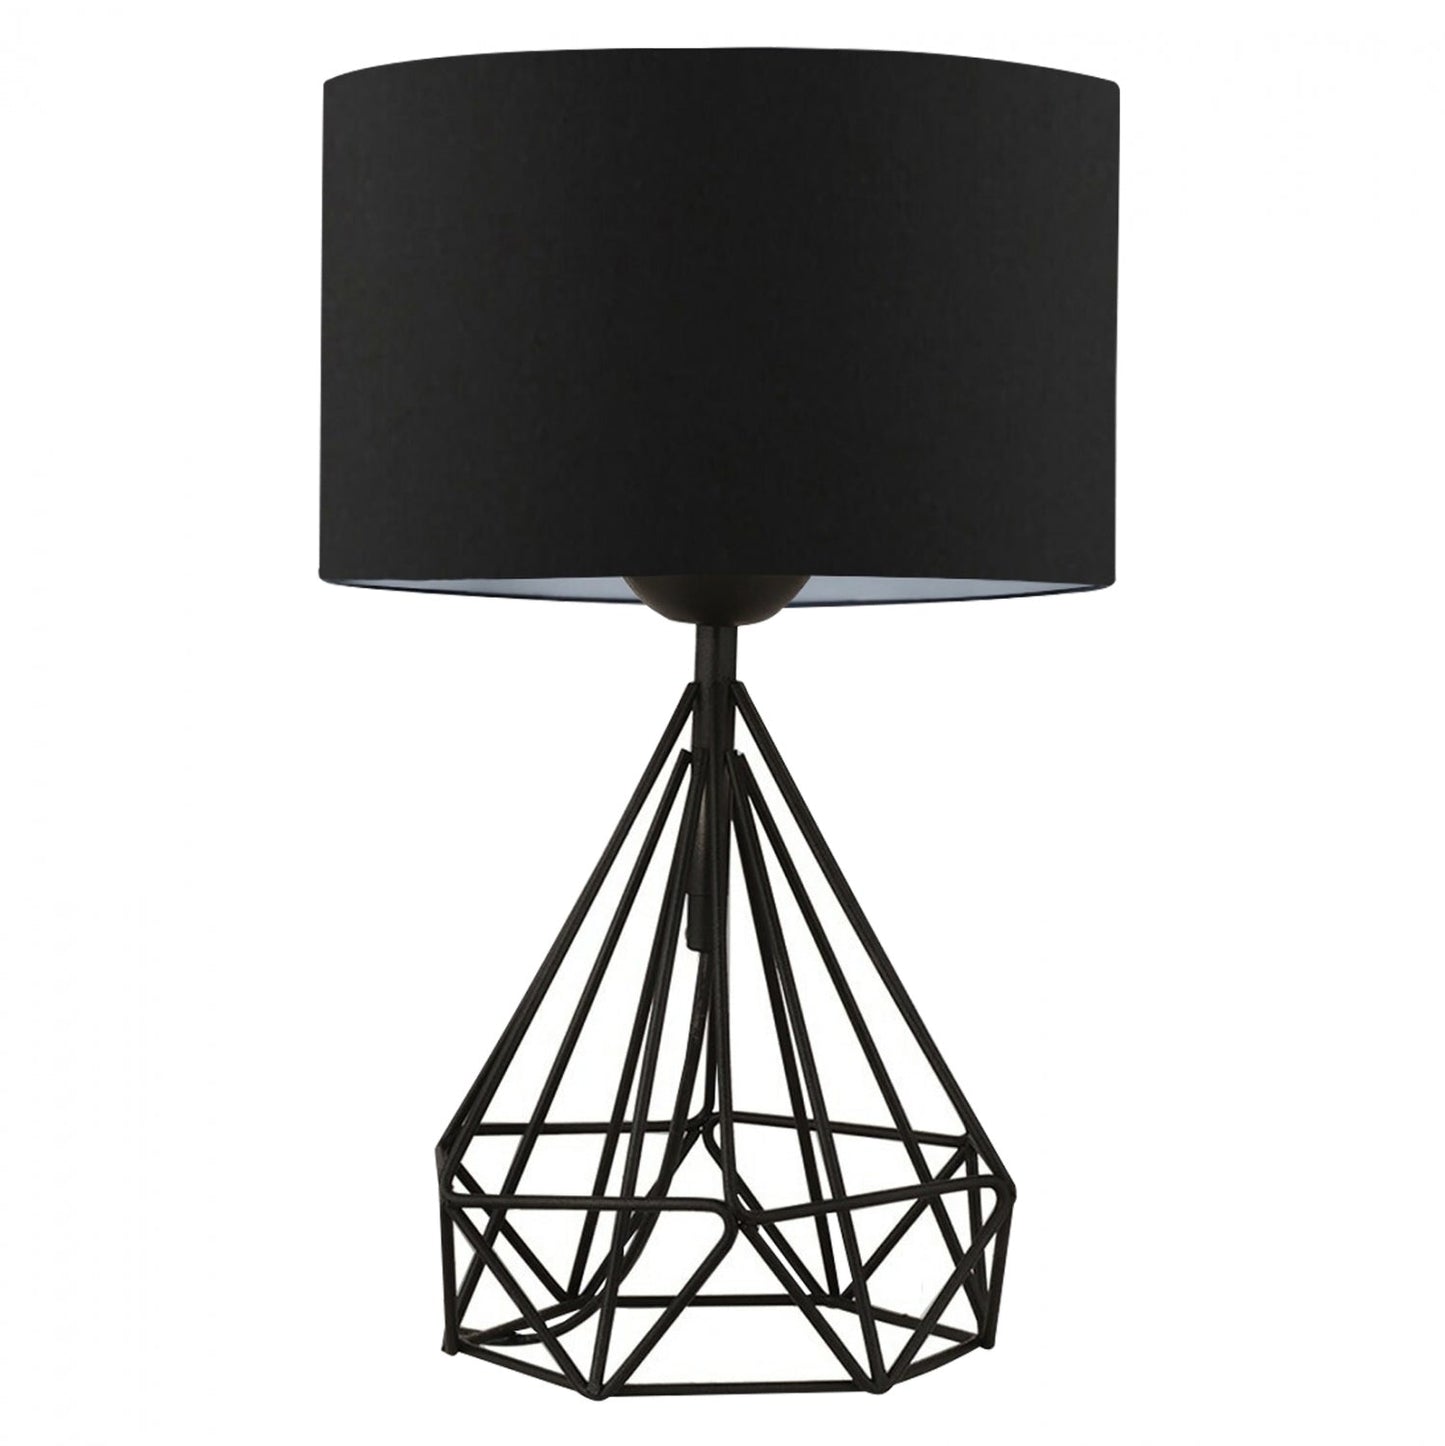 Buy Geometric Metal Lamp online on Doorpey.com. Explore our wide range of hanging lights, wall mounted lights, ceiling lights, pendant lights and many other lights for home and office use.